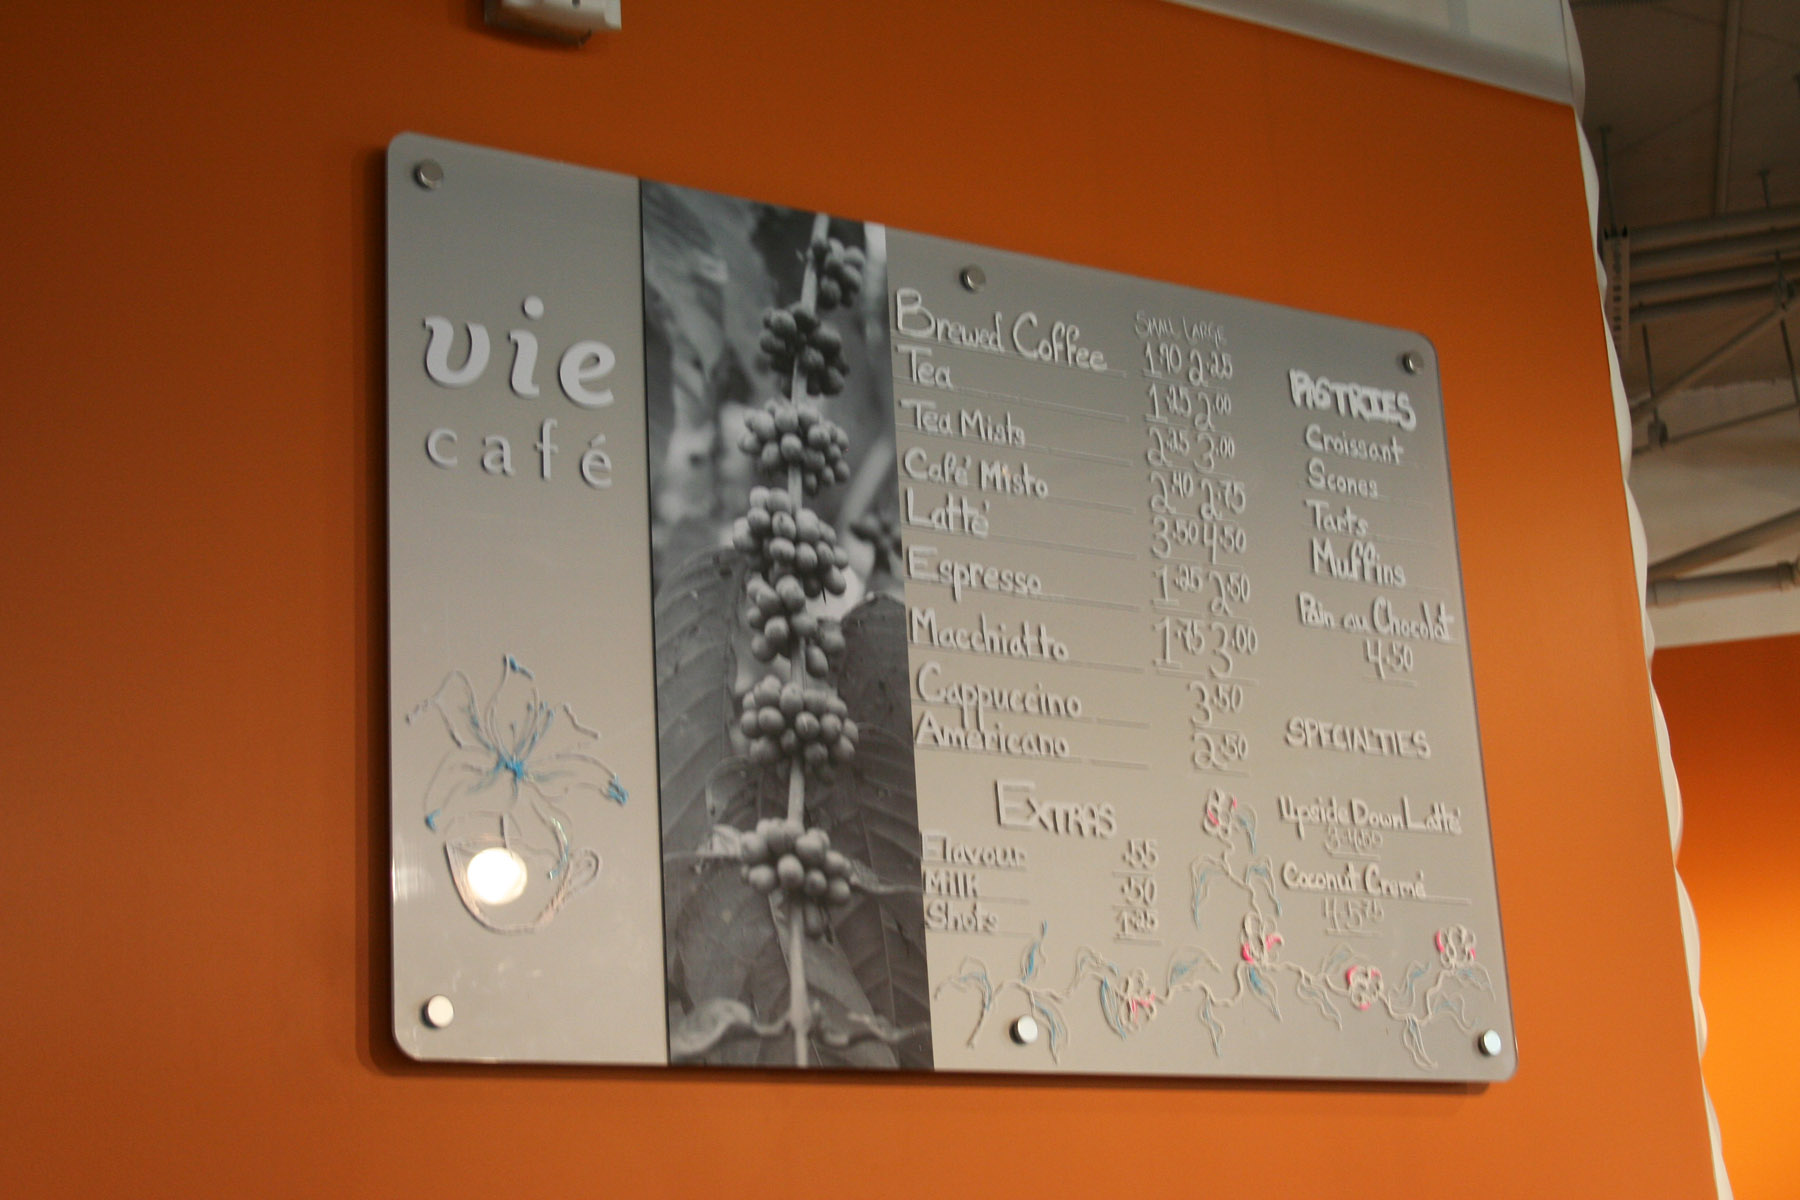  Vie café wall plexiglass sign with logo and image decal . Areas left blank for customizing the menu and daily specials. 